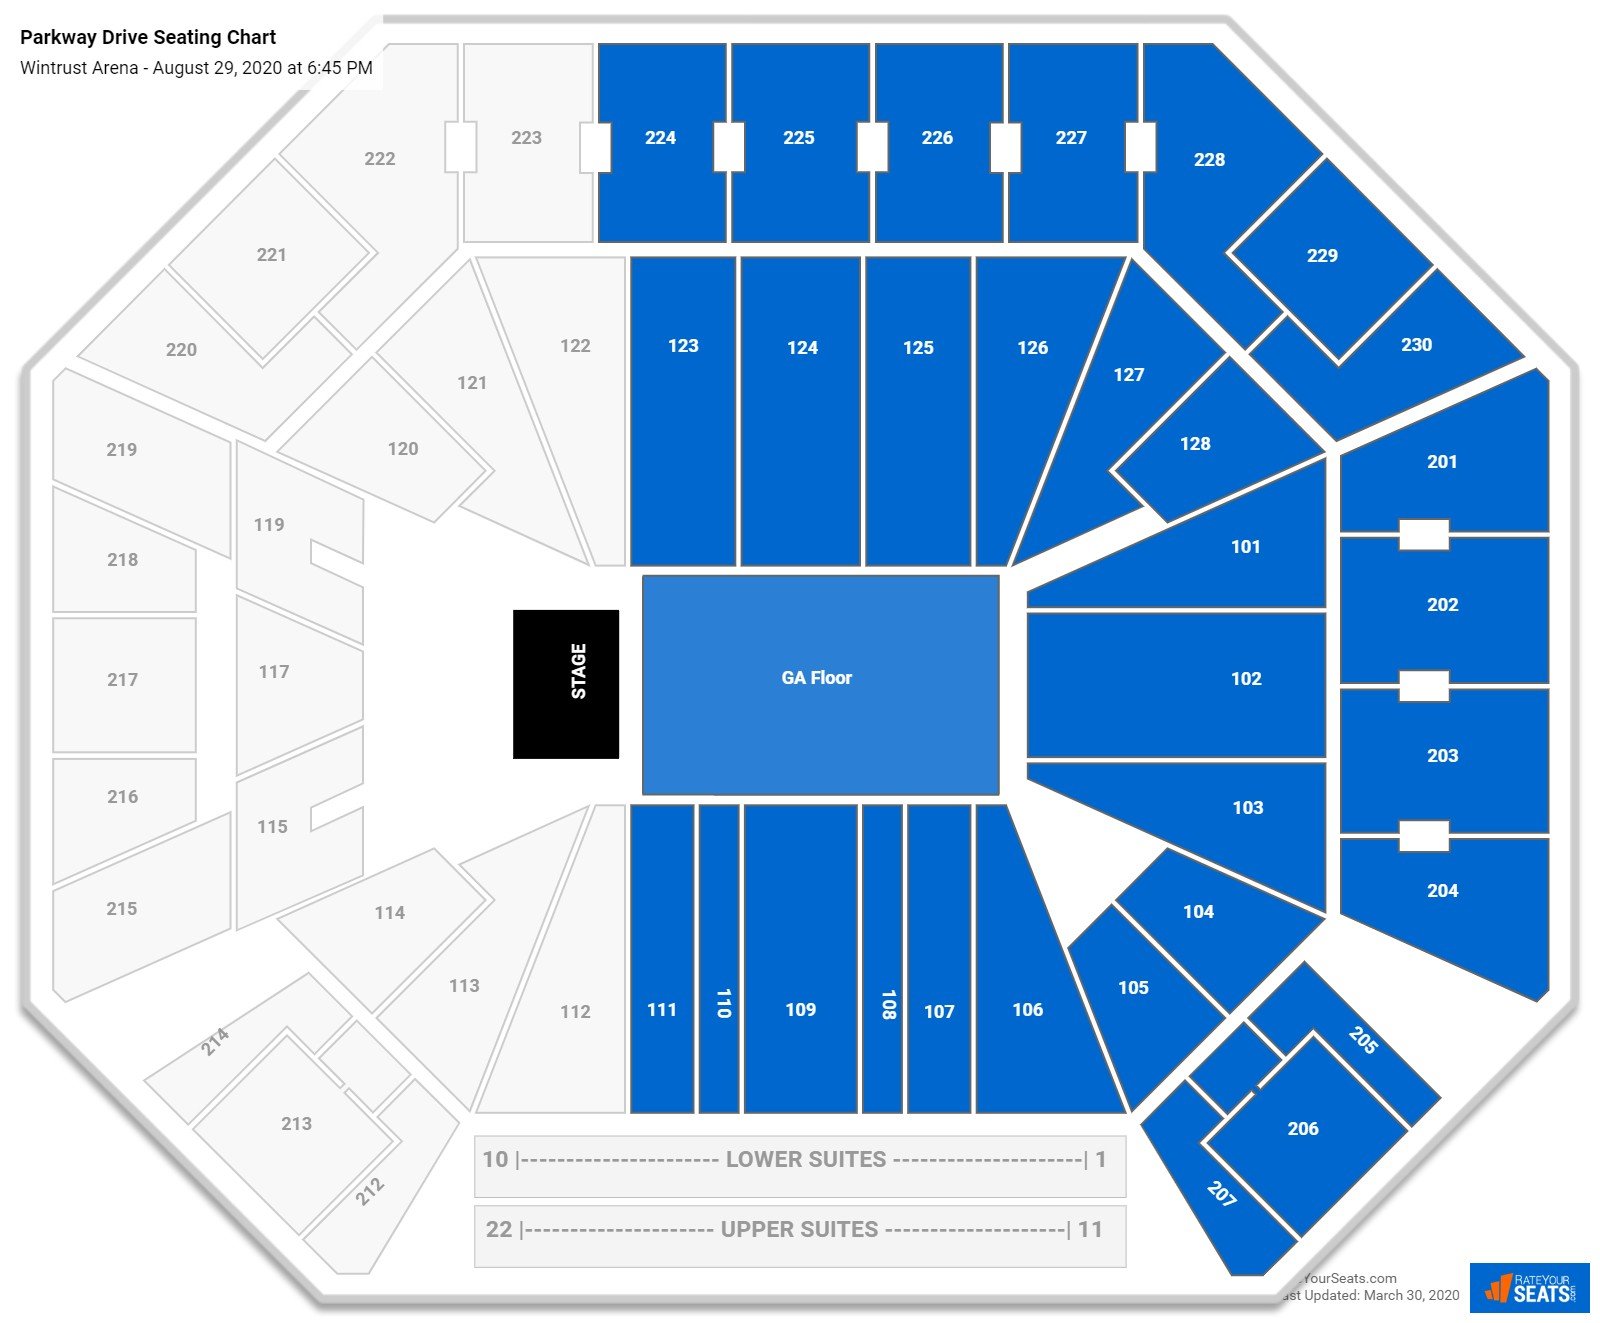 Wintrust Arena Seating Charts for Concerts